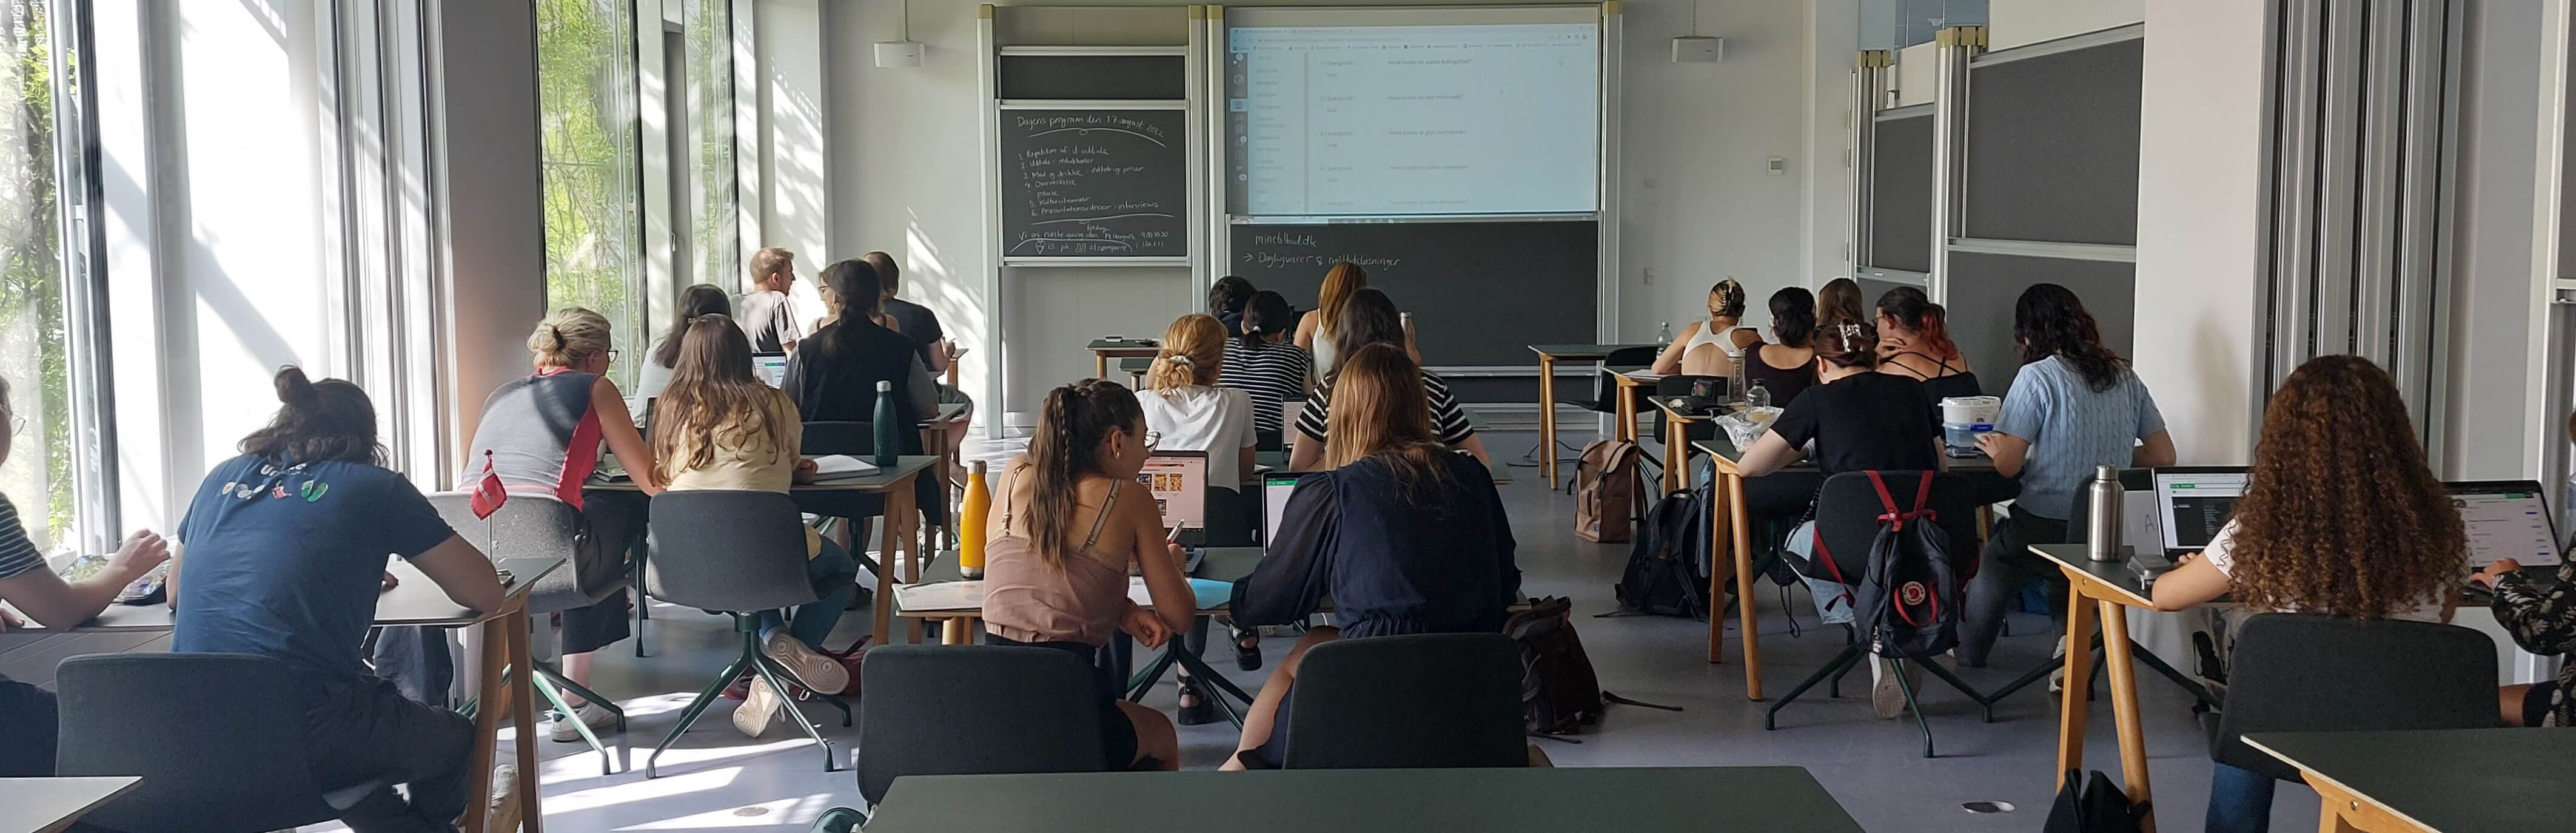 Classroom with students viewed from behind